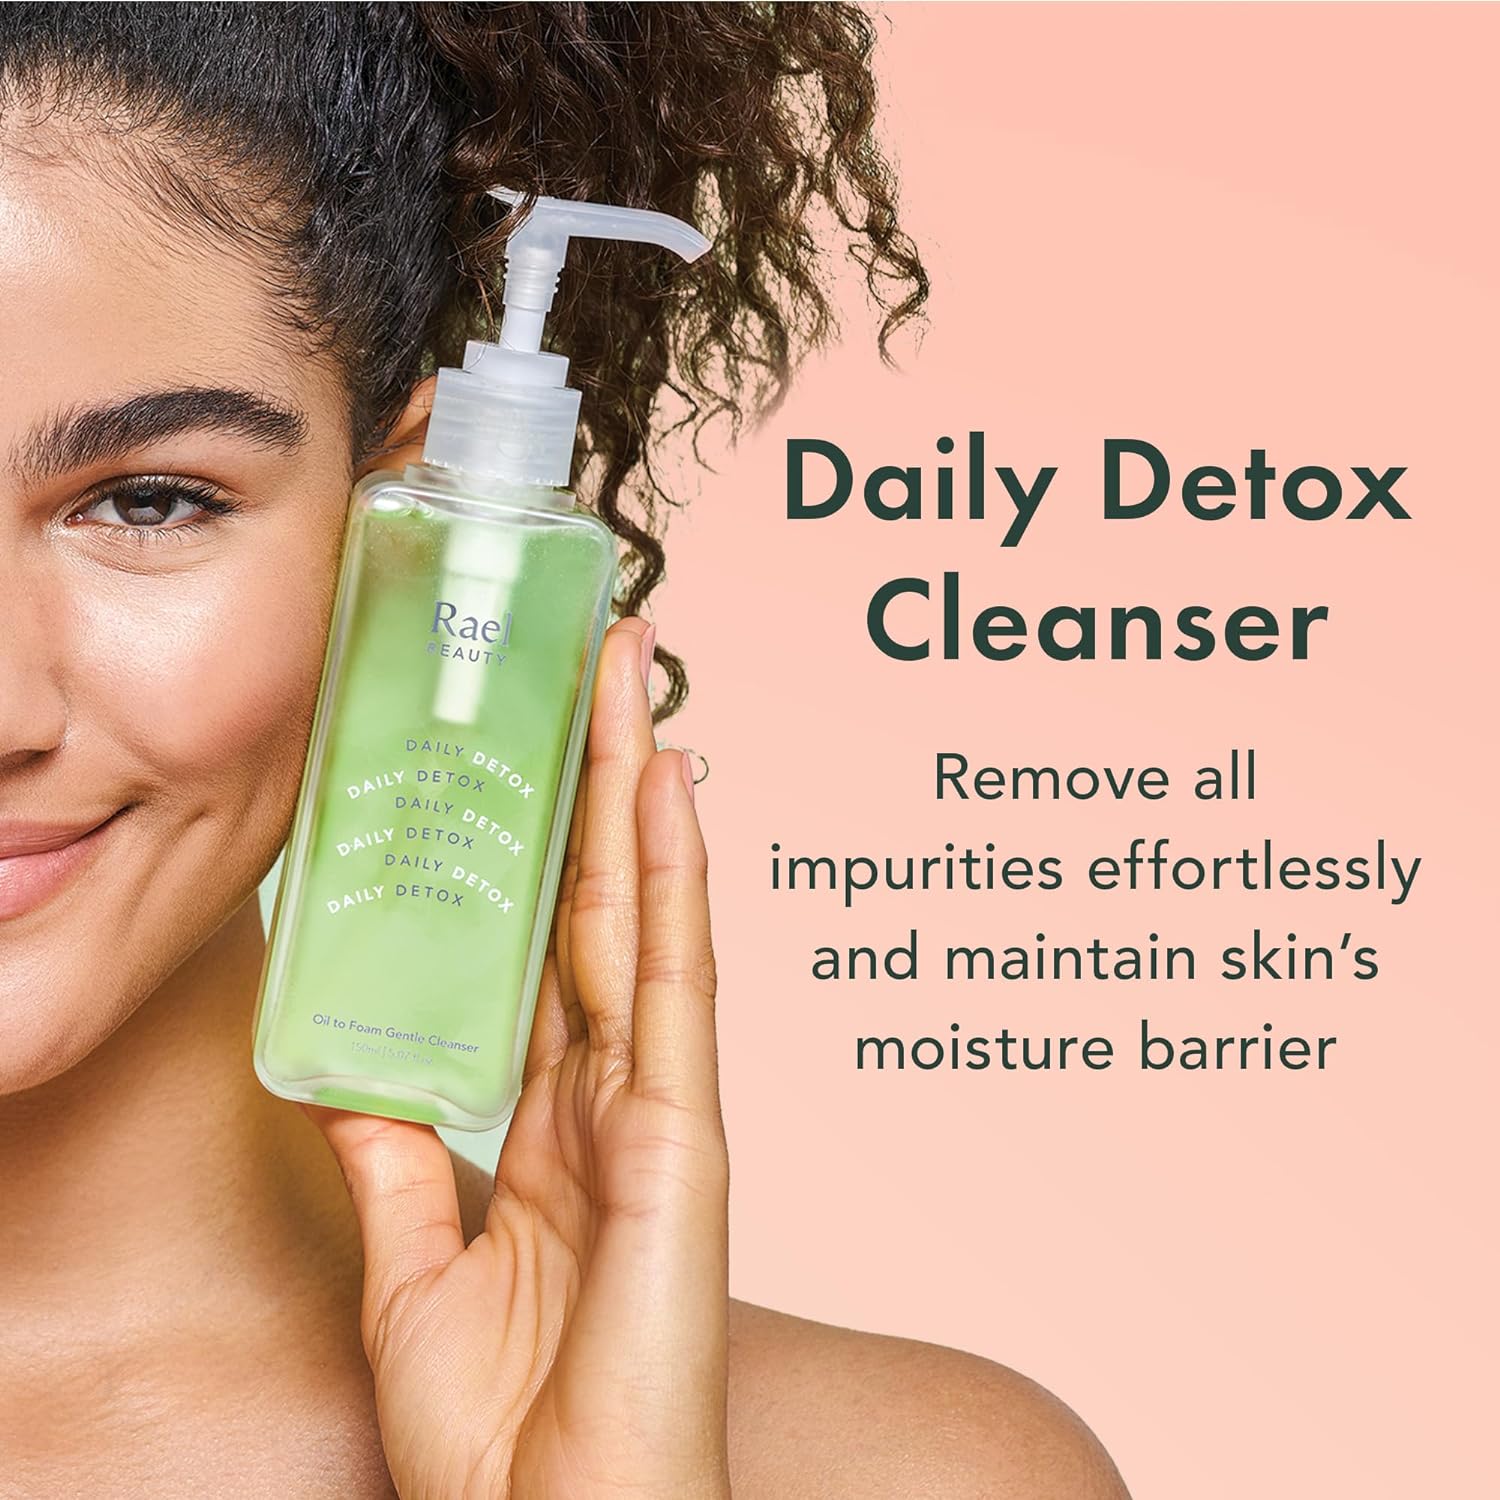 Rael Skin Care, Facial Cleanser - Oil to Foam, Gentle Face Wash, Daily Foaming Cleanser, All Skin Types, Hydrating Vitamin B5, Daily, Clean Ingredients, Cruelty Free Skin Care (5.07oz) : Beauty & Personal Care